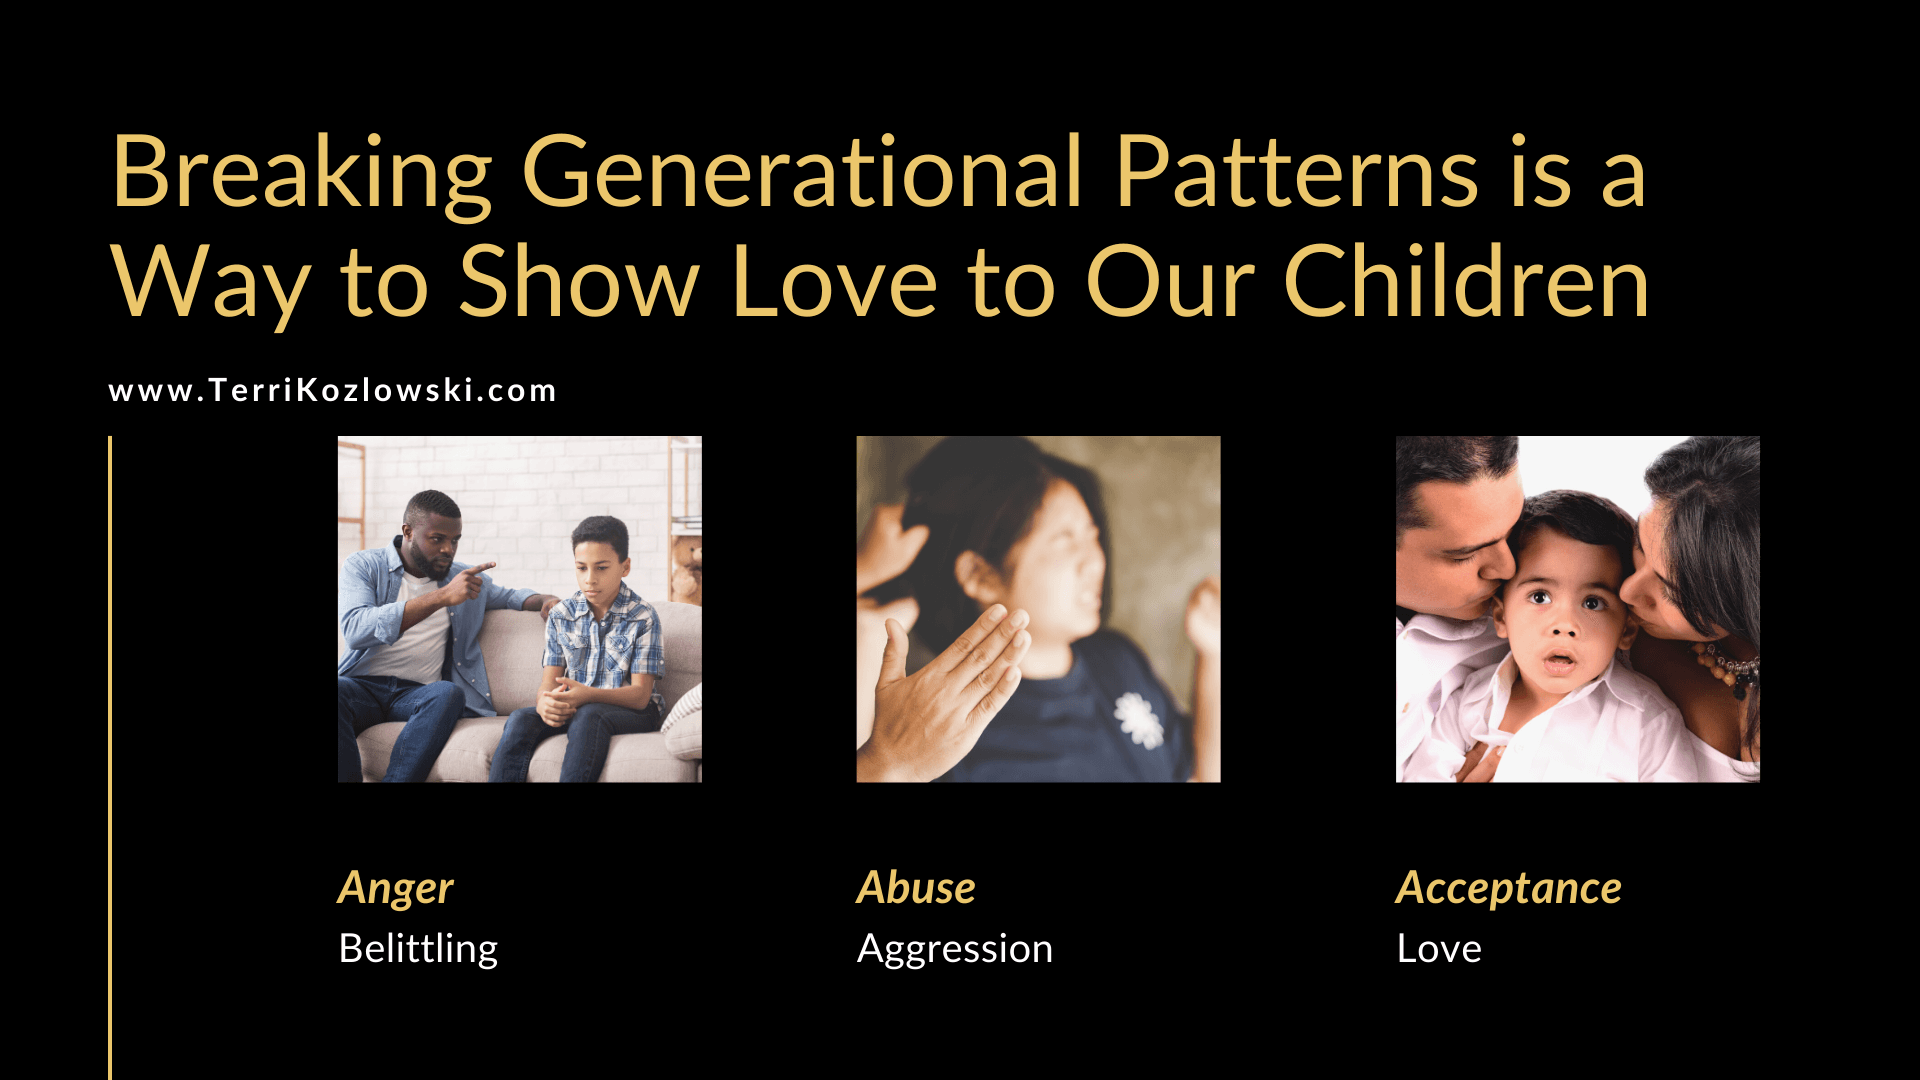 Breaking Generational Patterns is a Way to Show Love to Our Children